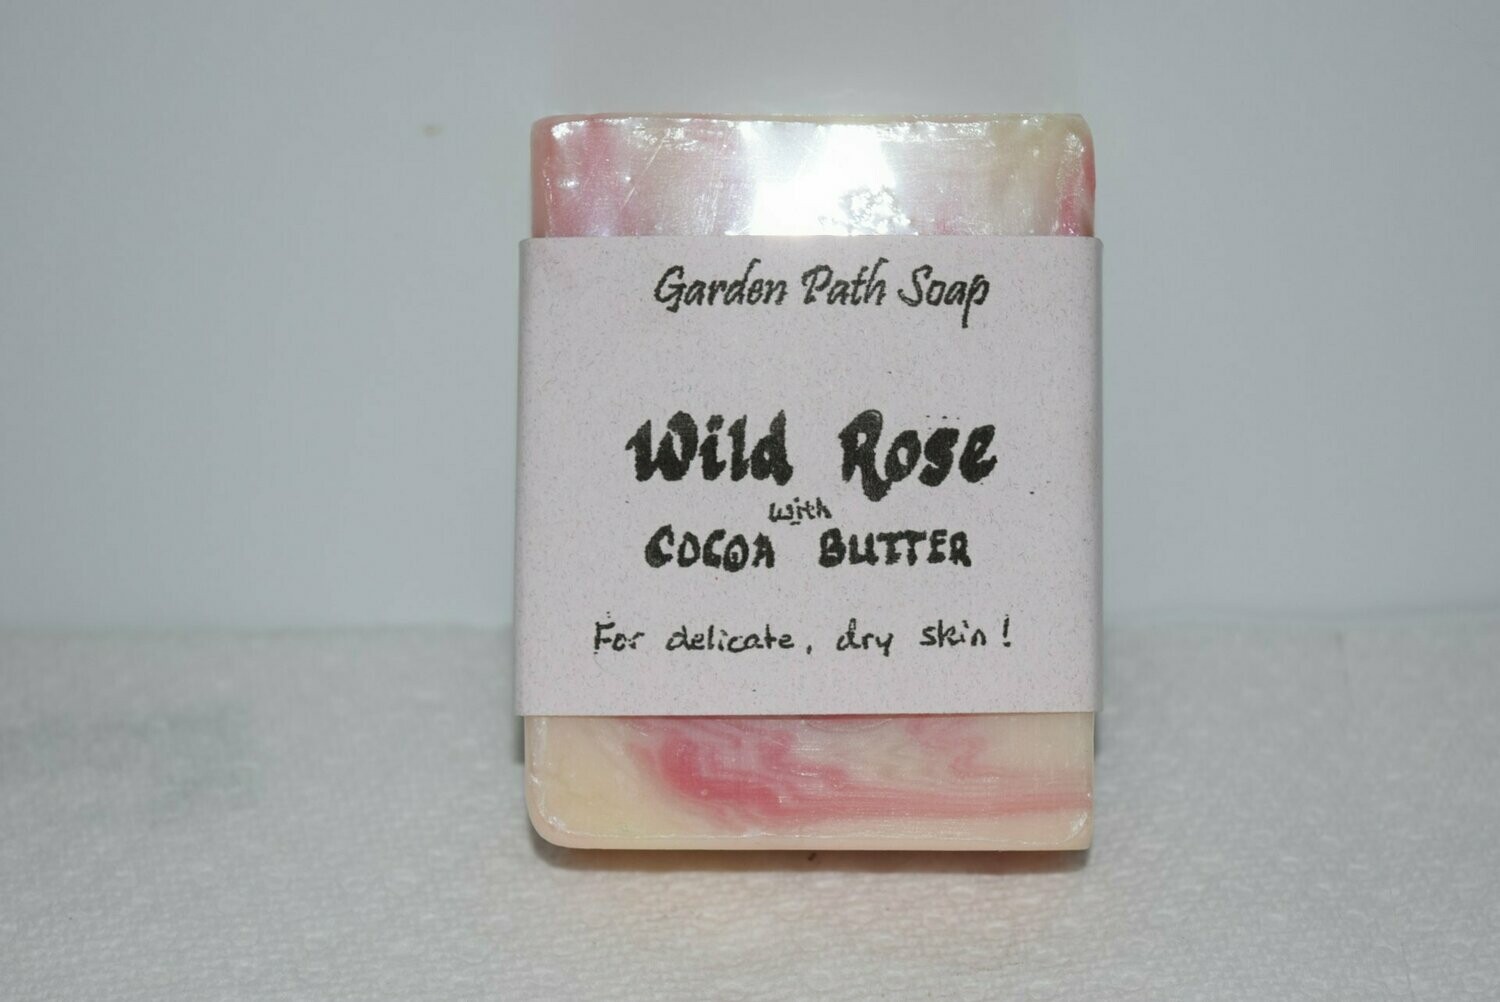 Wild Rose with Cocoa Butter Soap